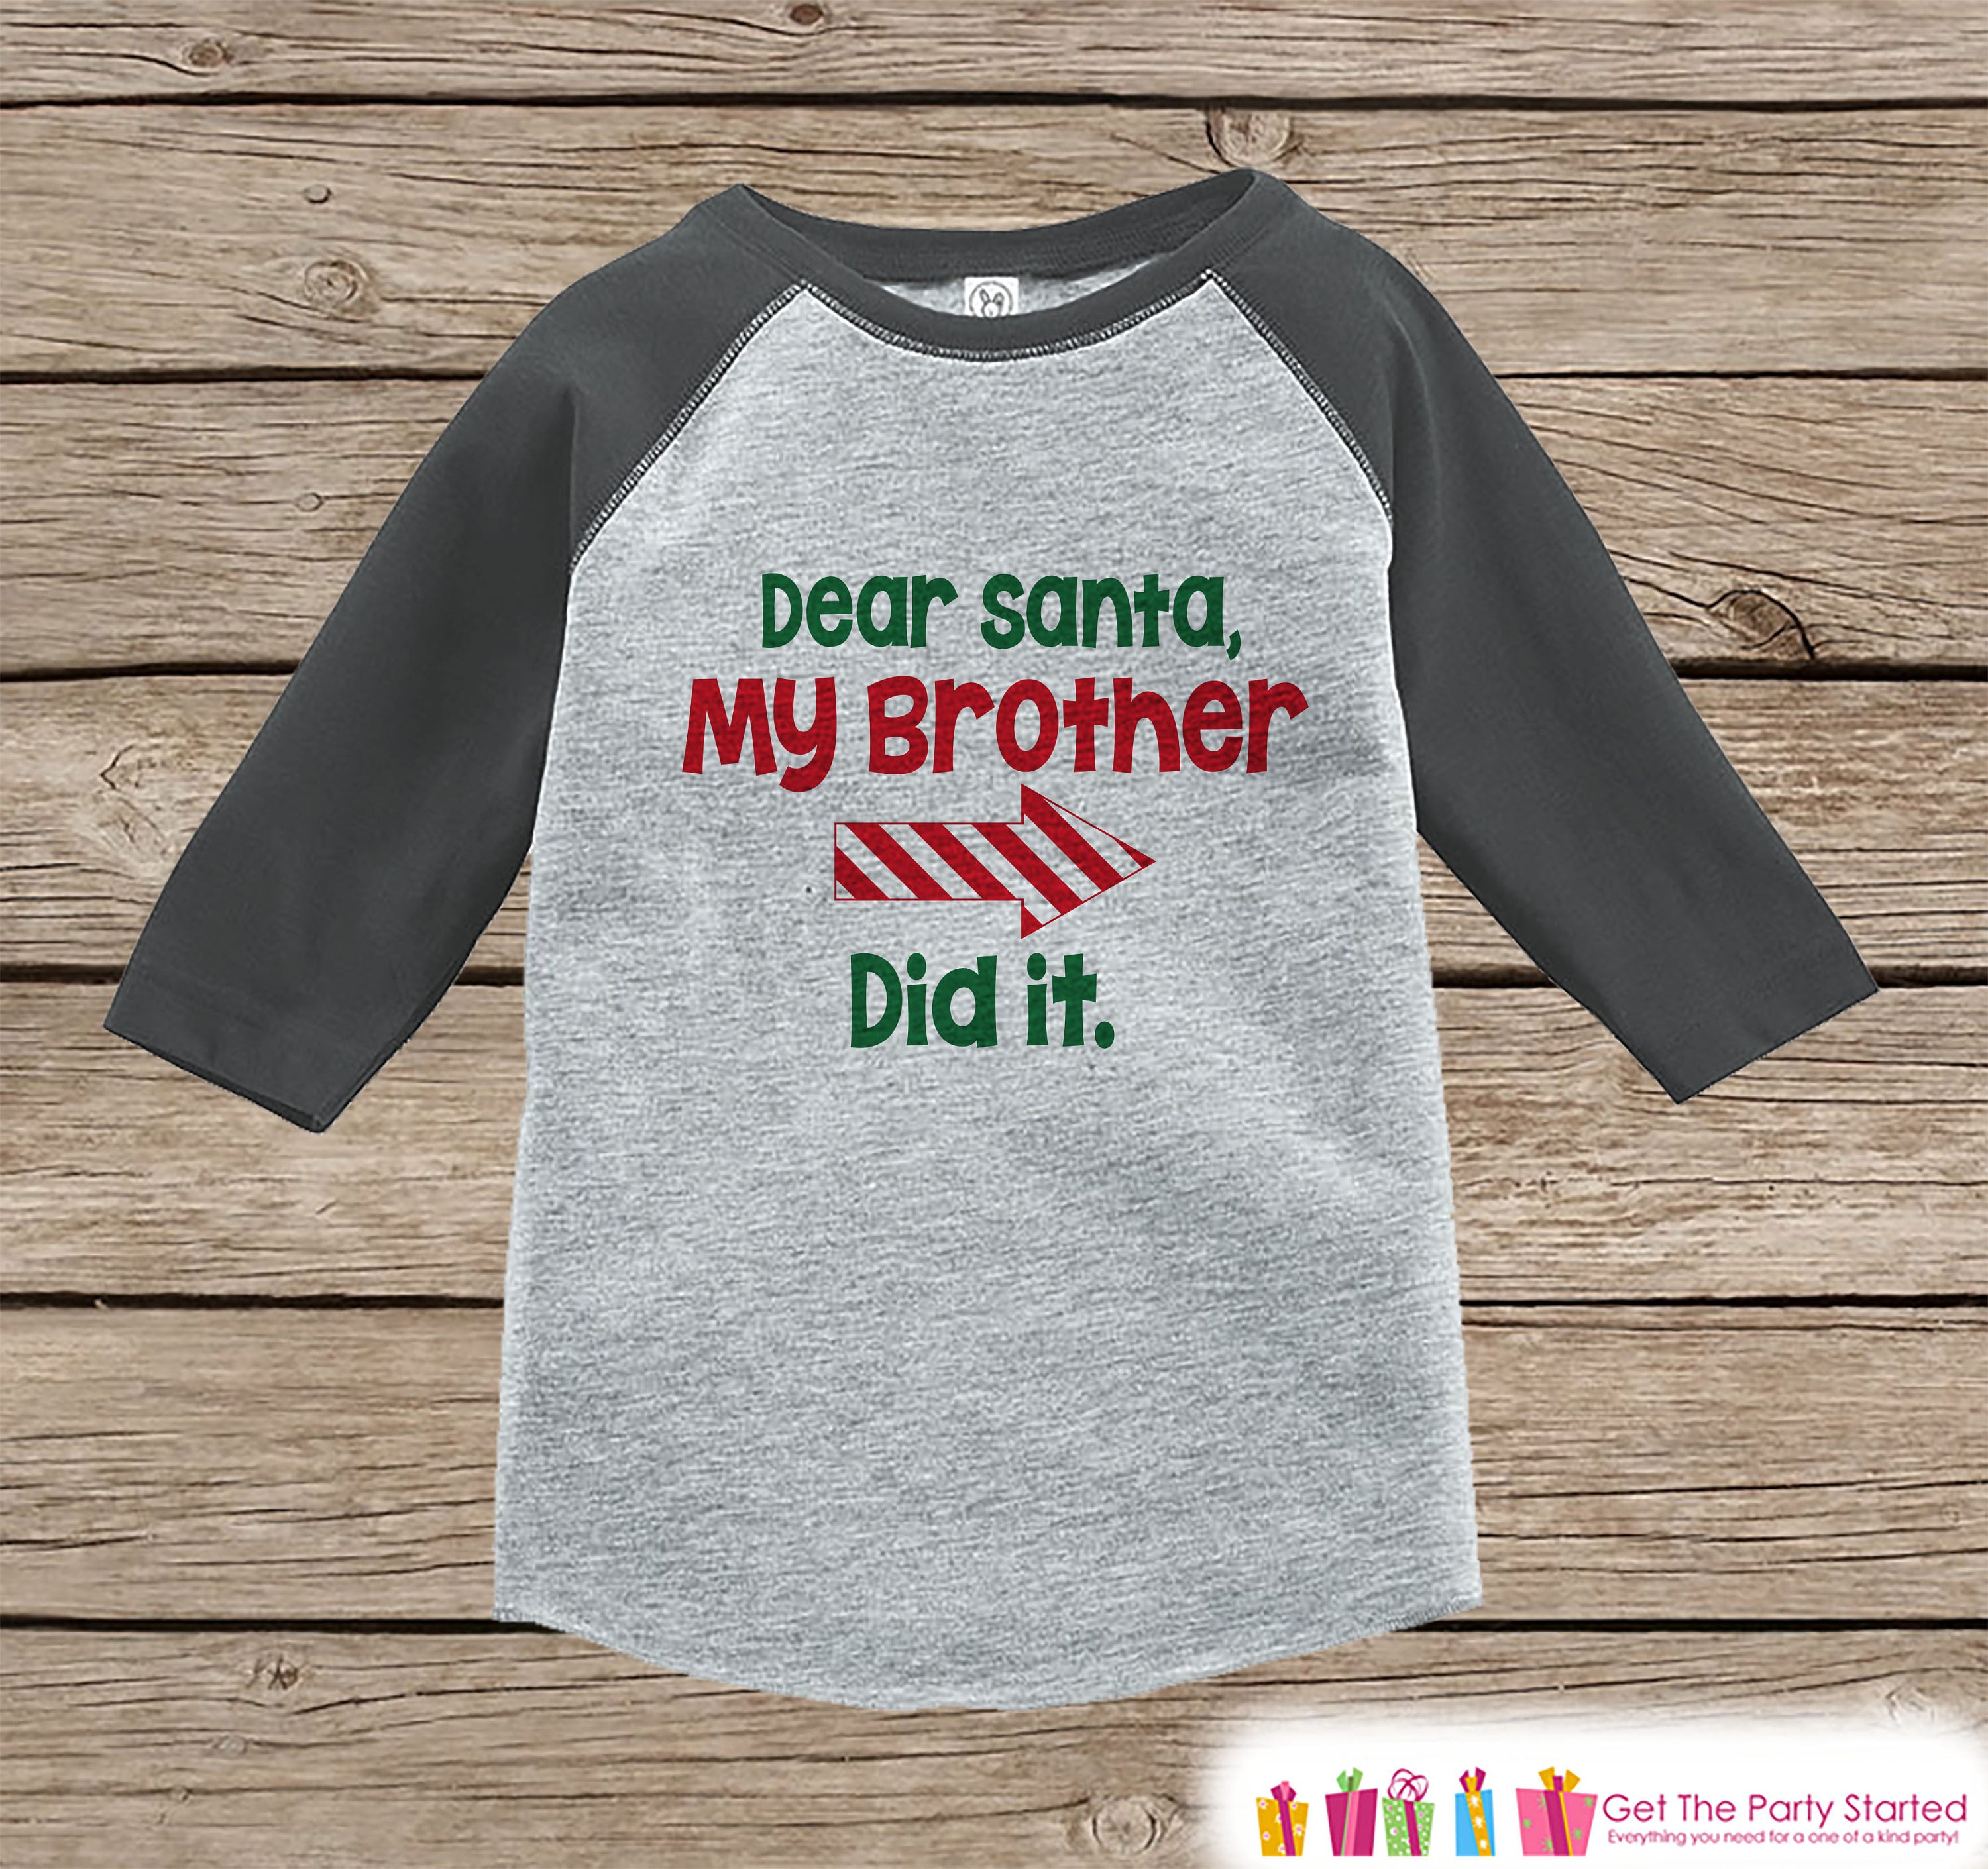 Kids Christmas Shirt - My Brother Did It - Funny Sibling Shirt or Onepiece - Boy or Girl Christmas P